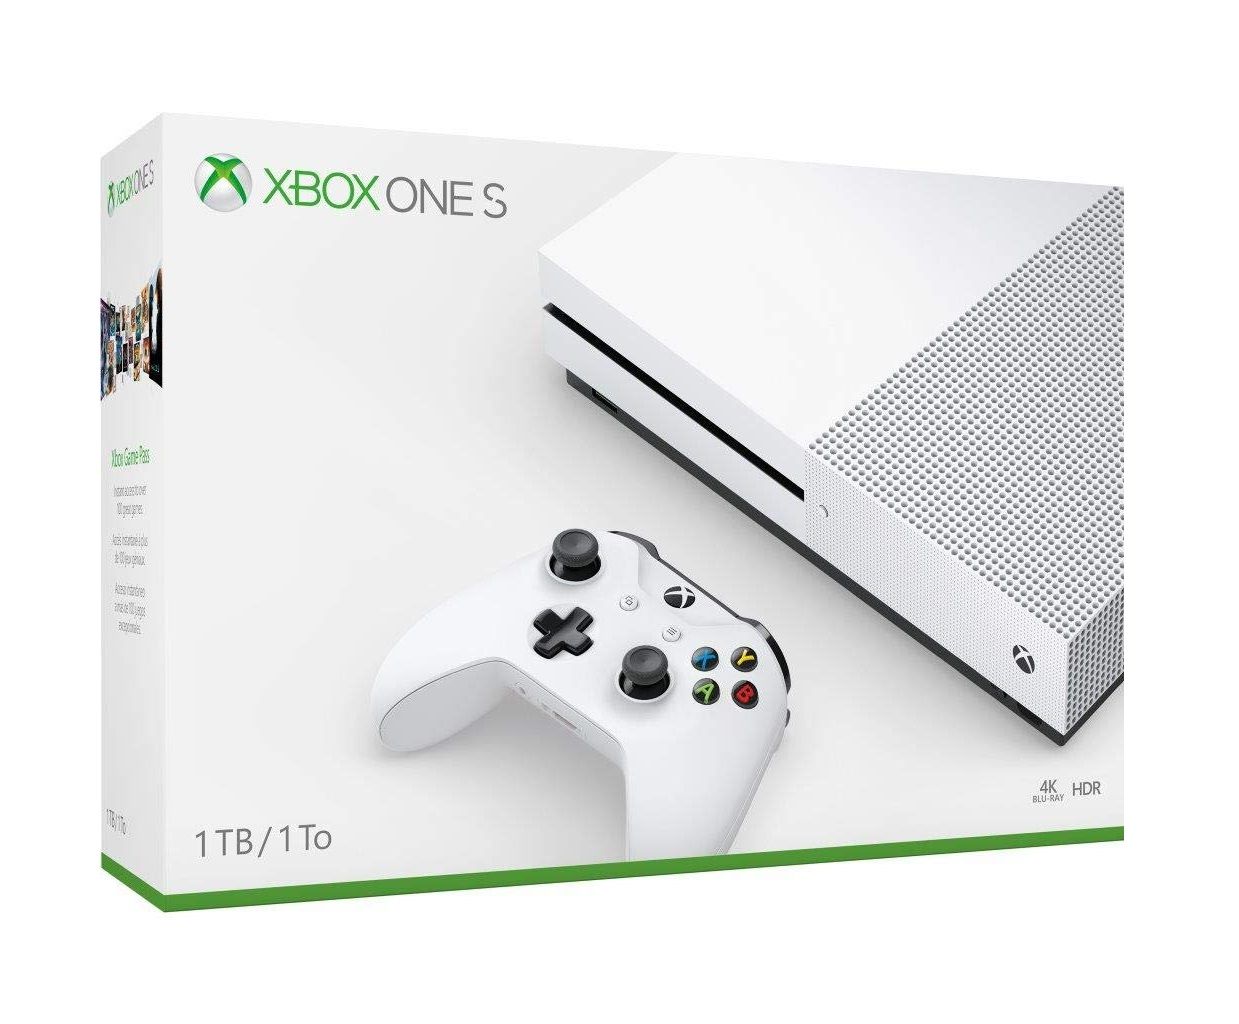 Packaging for Xbox One S